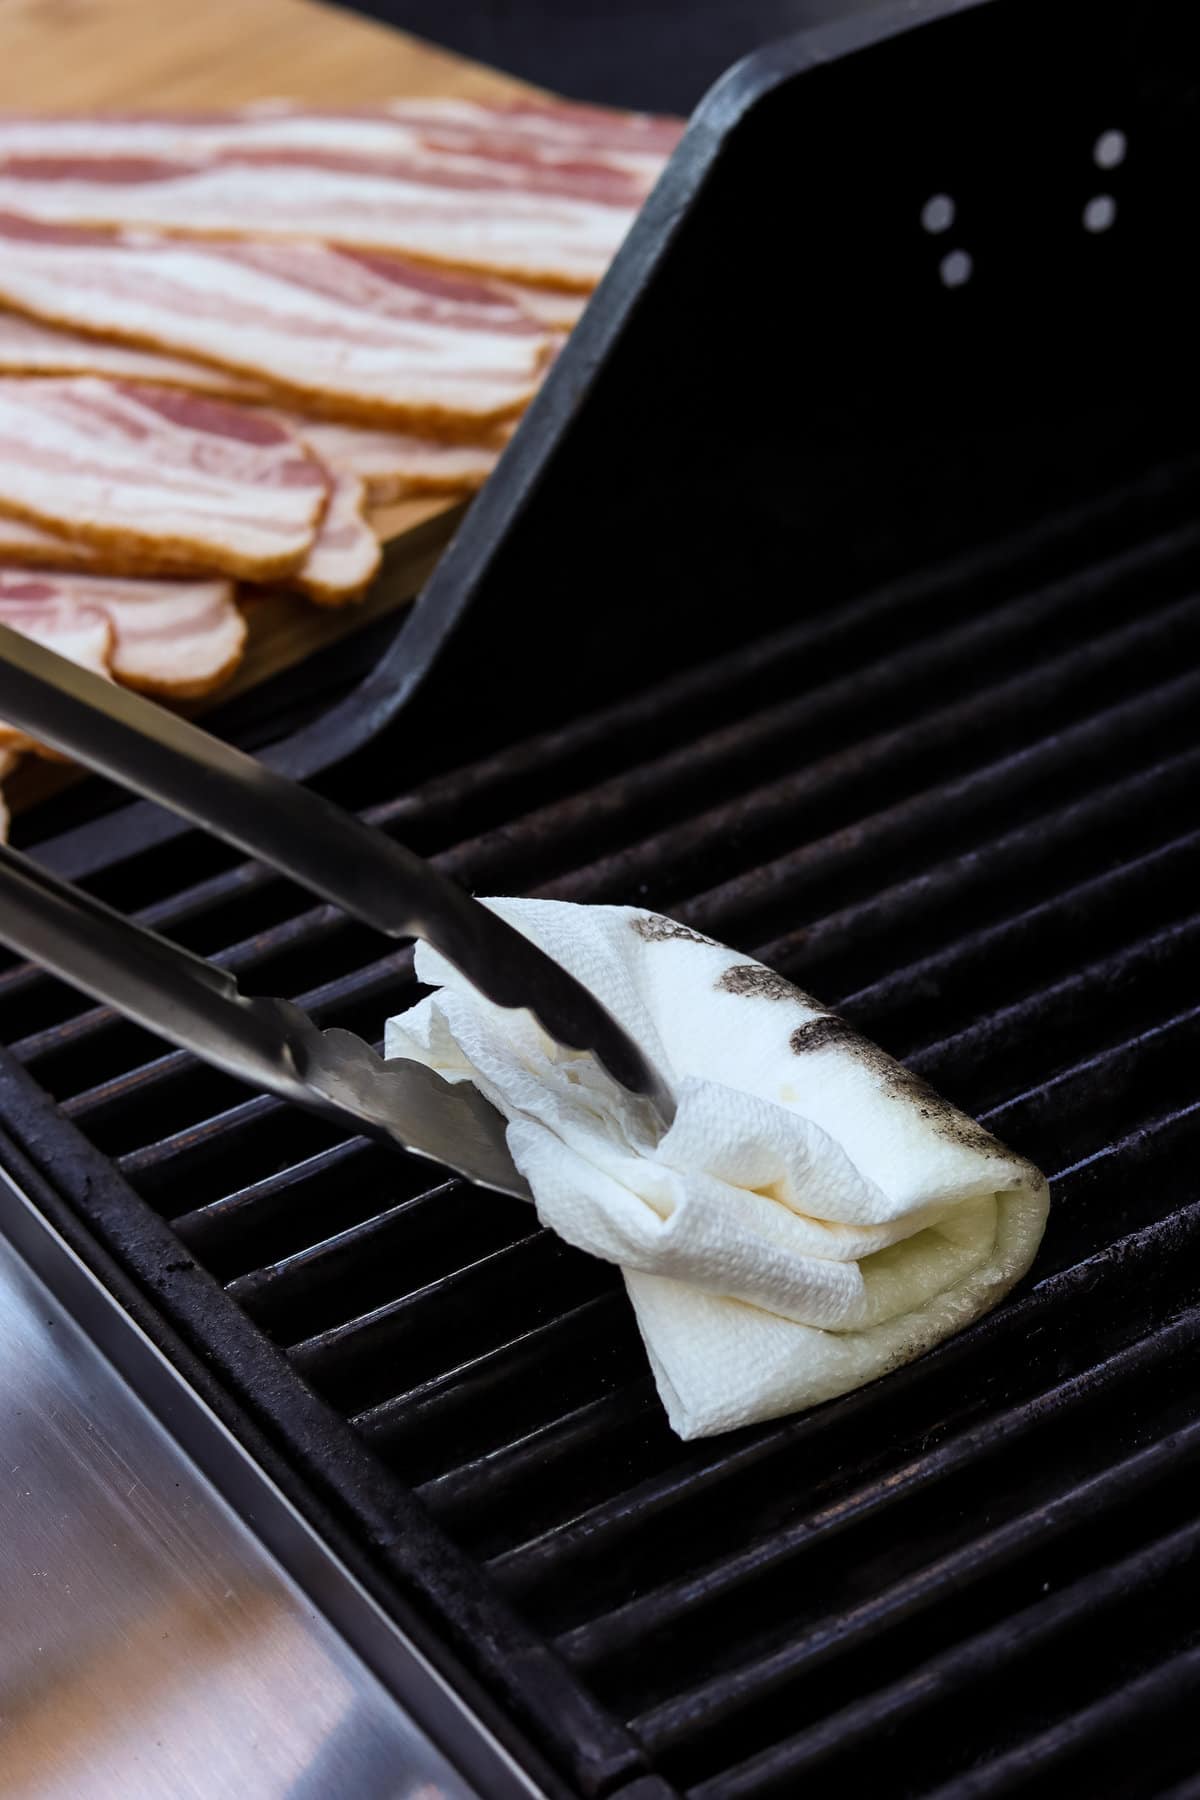 Oiling grill grates with paper towel